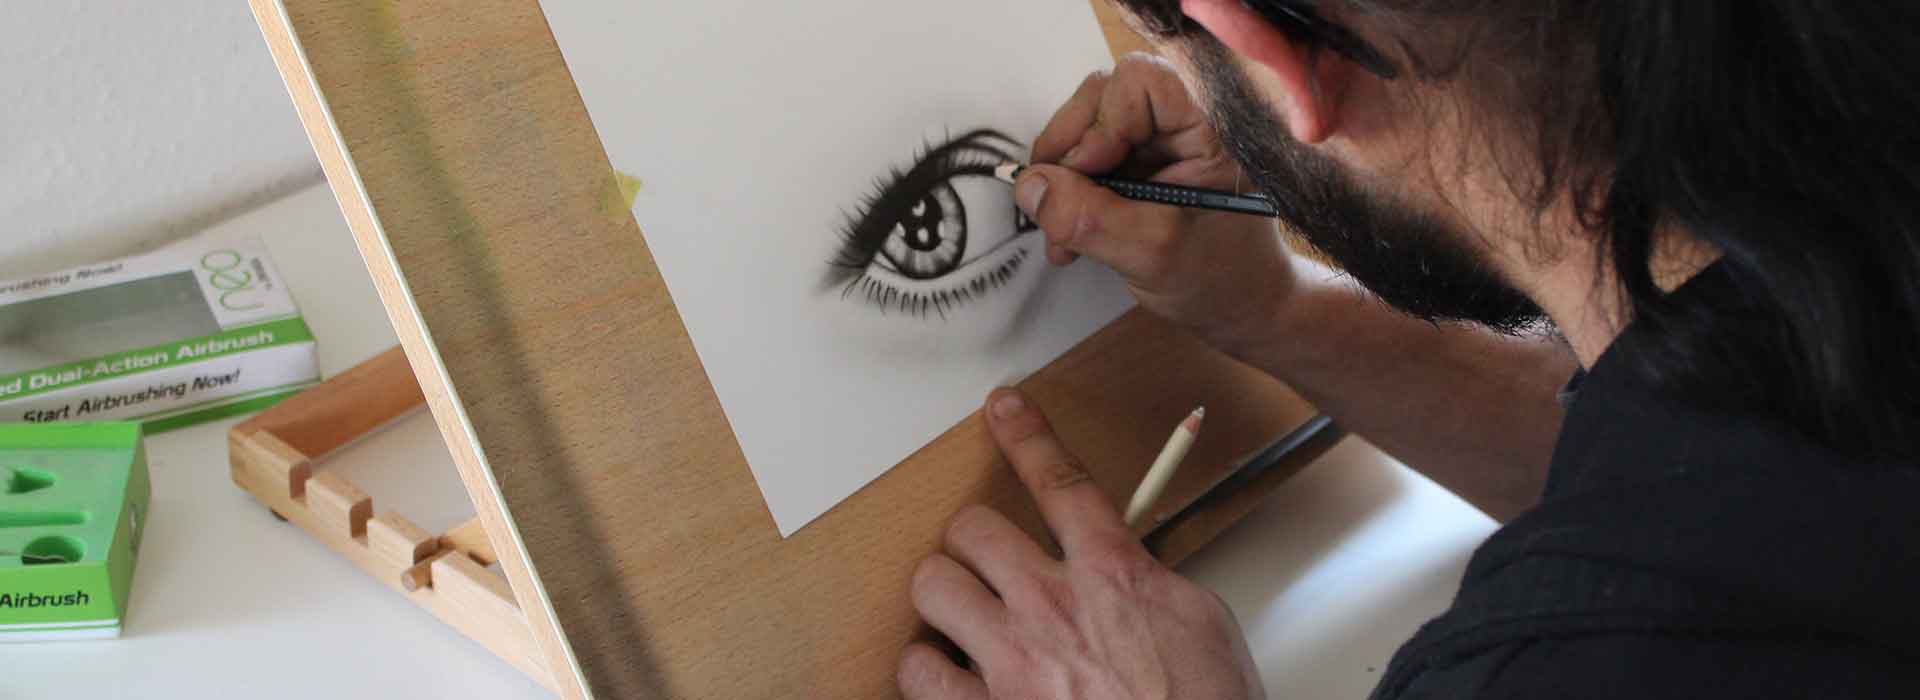 Professional art classes for adults and kids